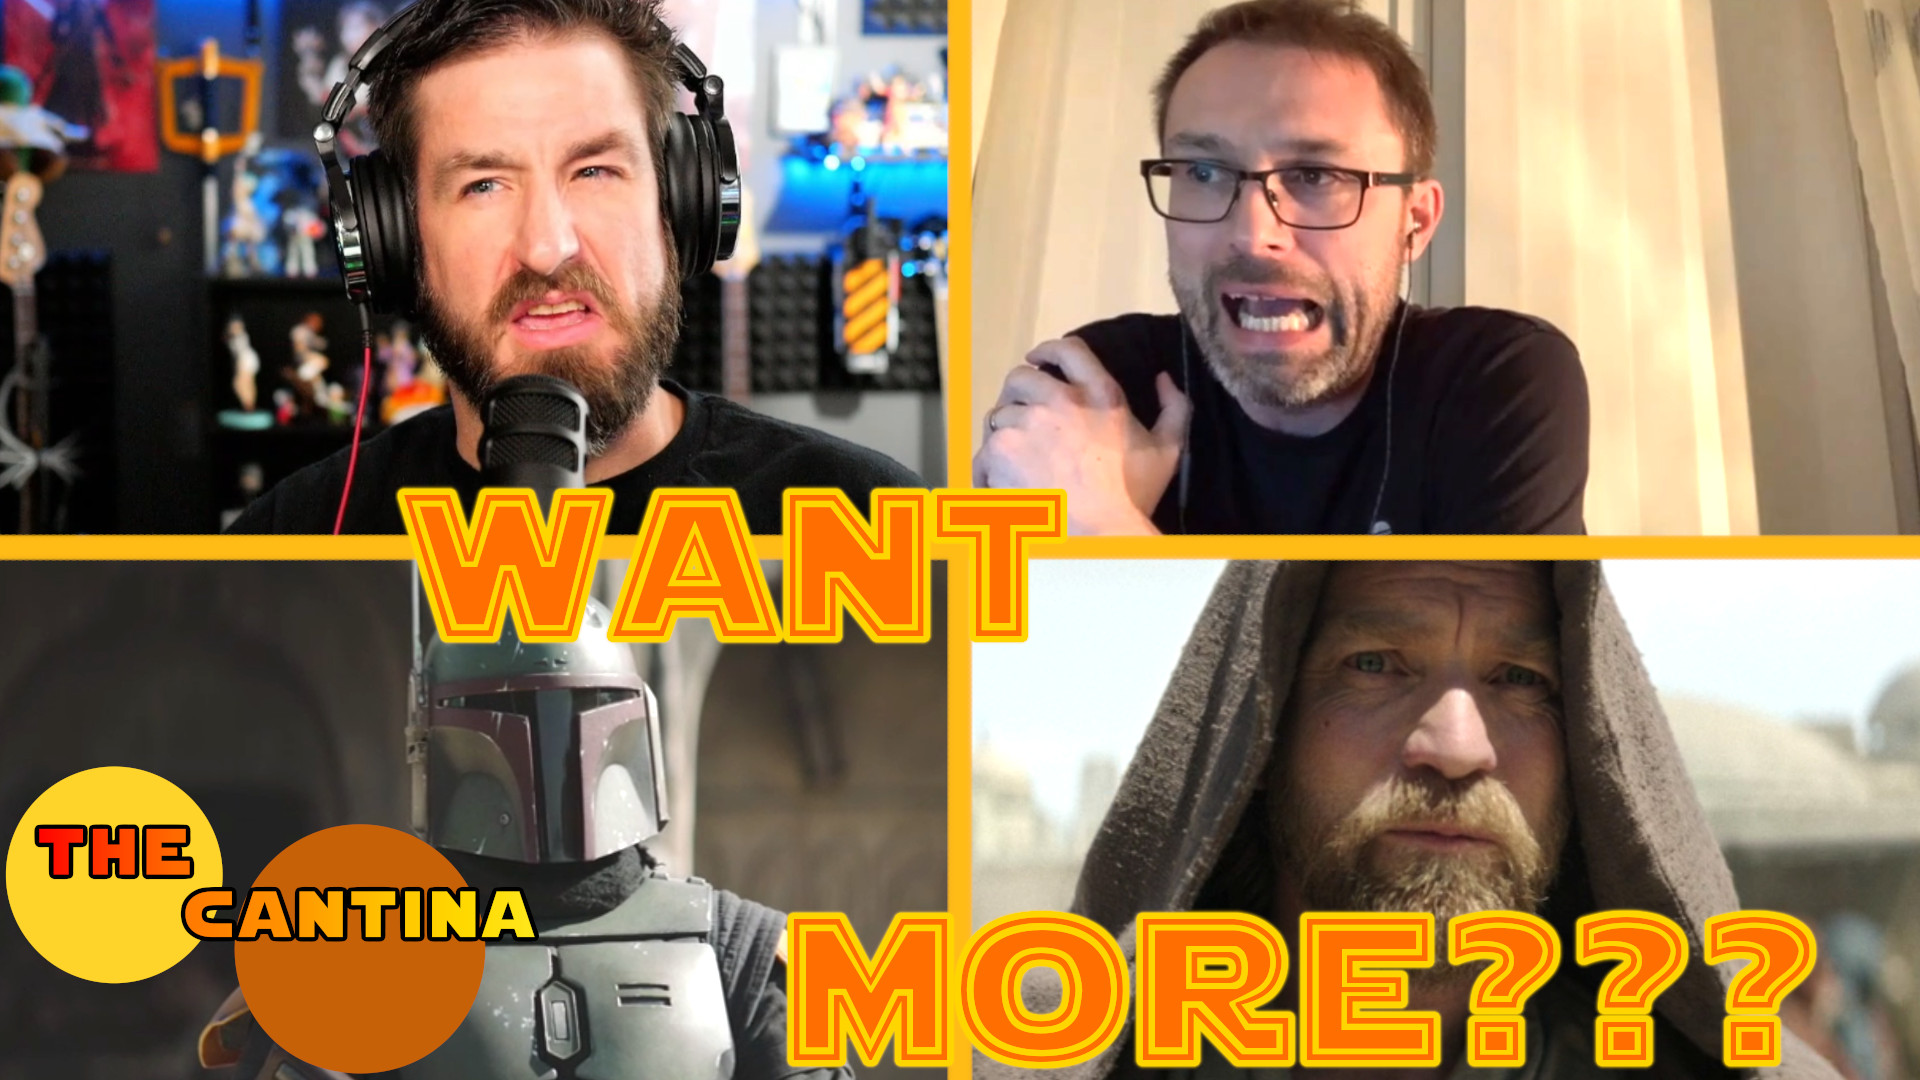 Image of Boba Fett from Book of Boba Fett and Obi-Wan Kenobi from the Obi-Wan Kenobi series are shown in a thumbnail for The Cantina podcast. Also pictured are hosts Kyle and Cam.